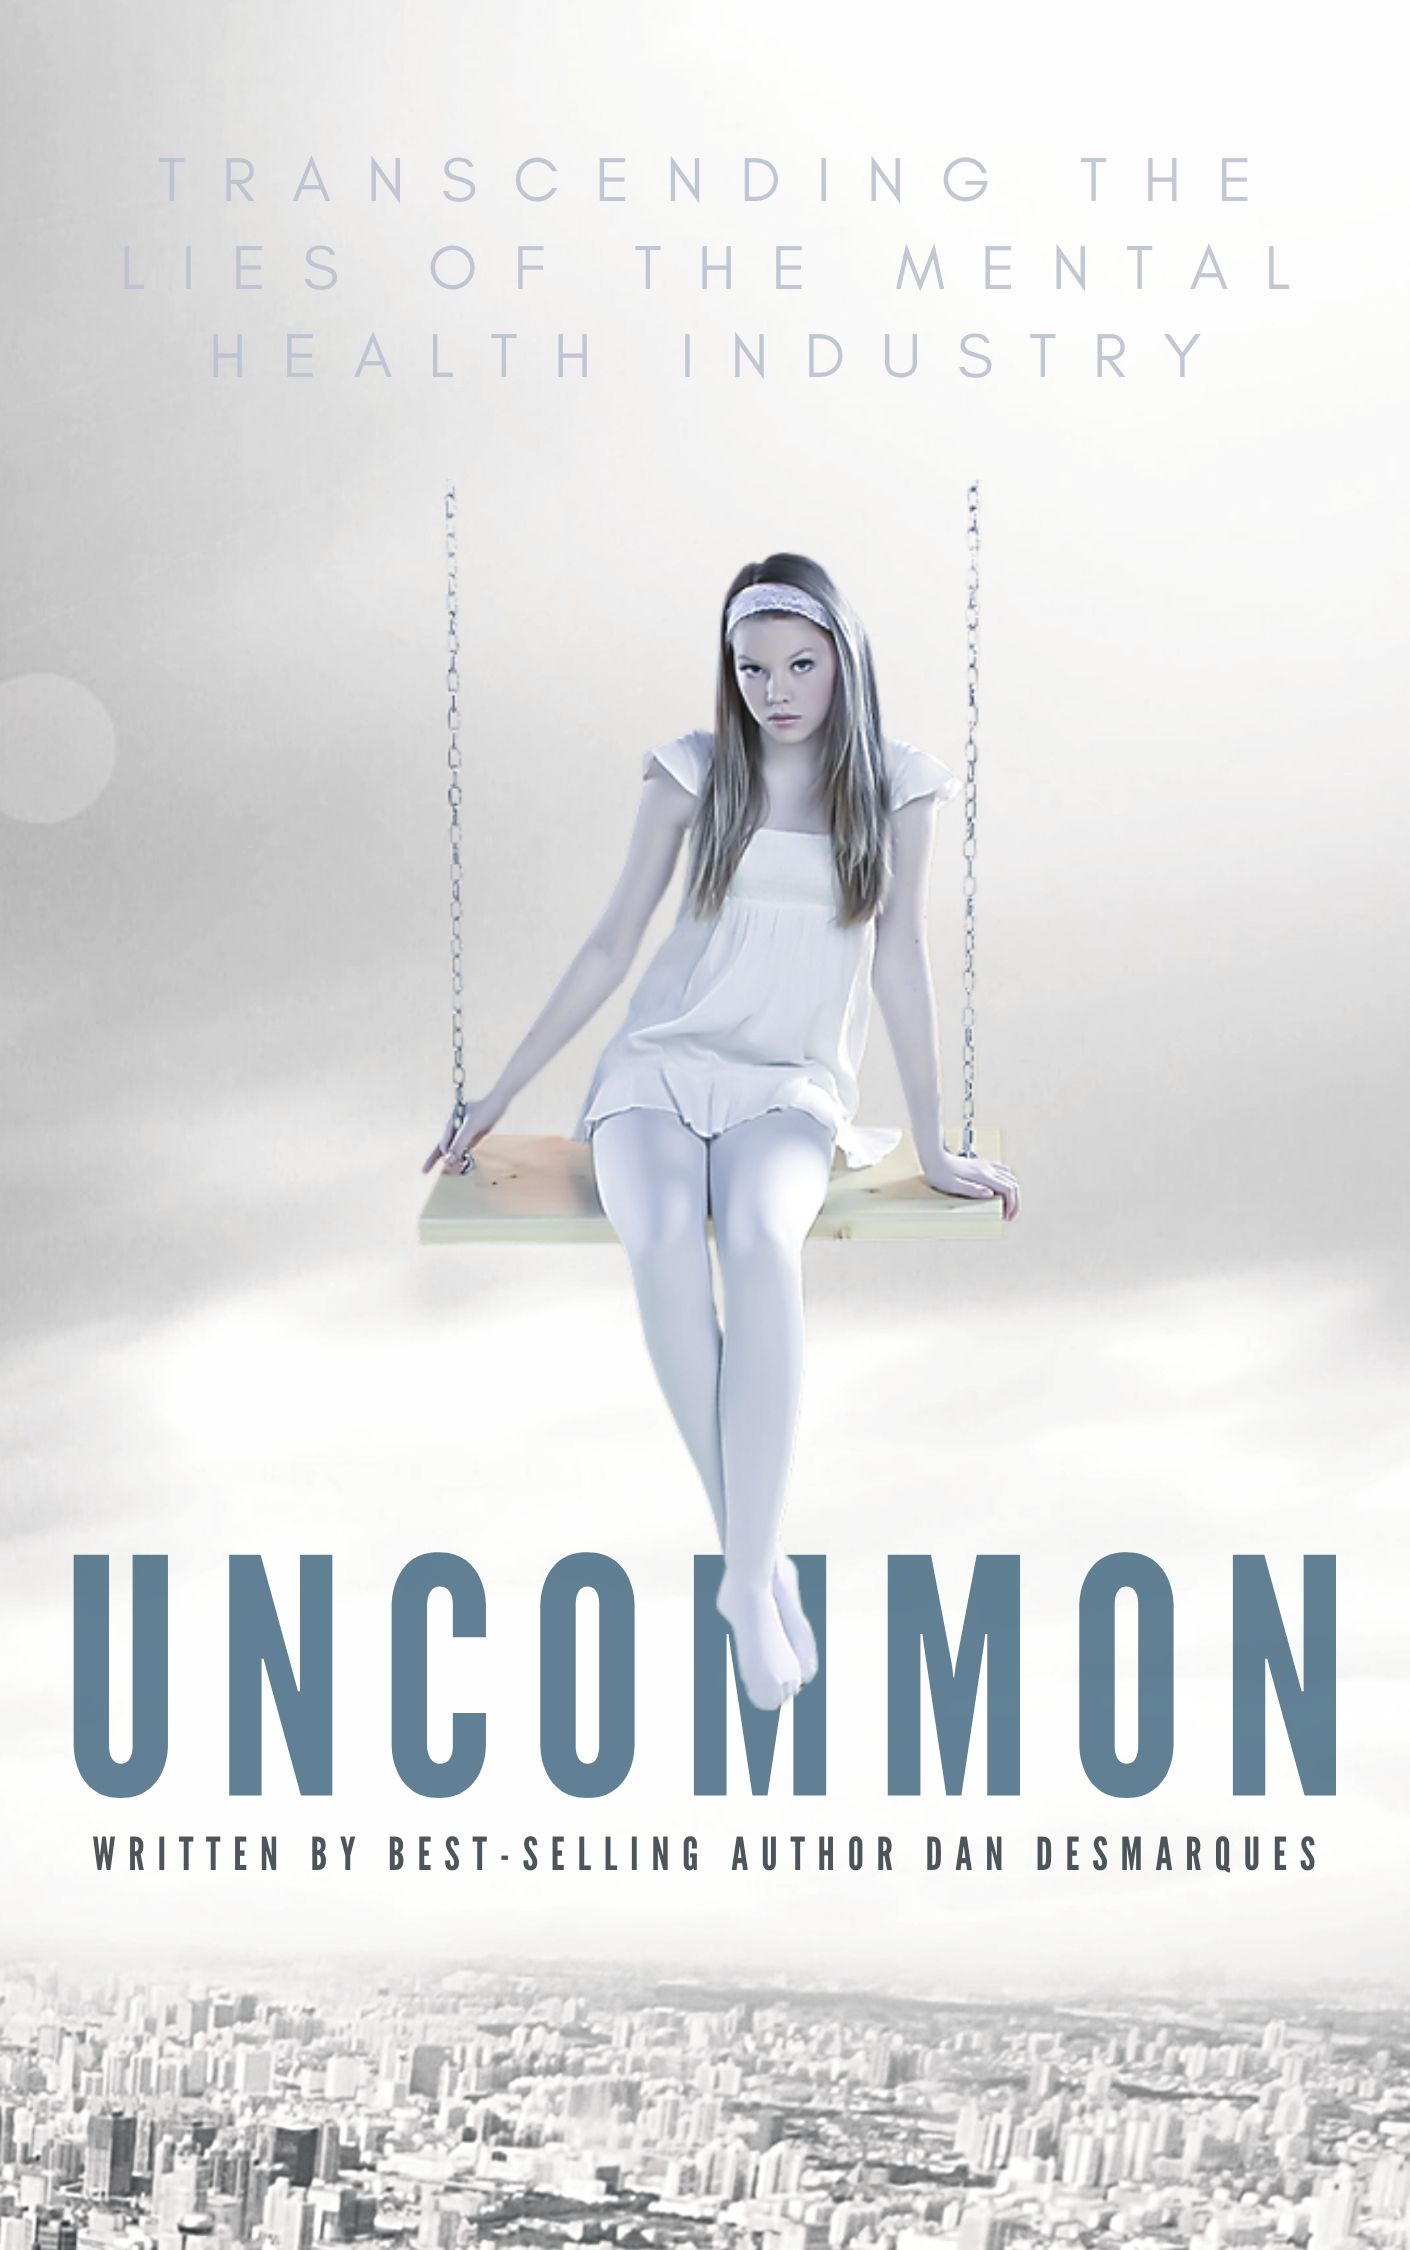 FREE: Uncommon: Transcending the Lies of the Mental Health Industry by Dan Desmarques